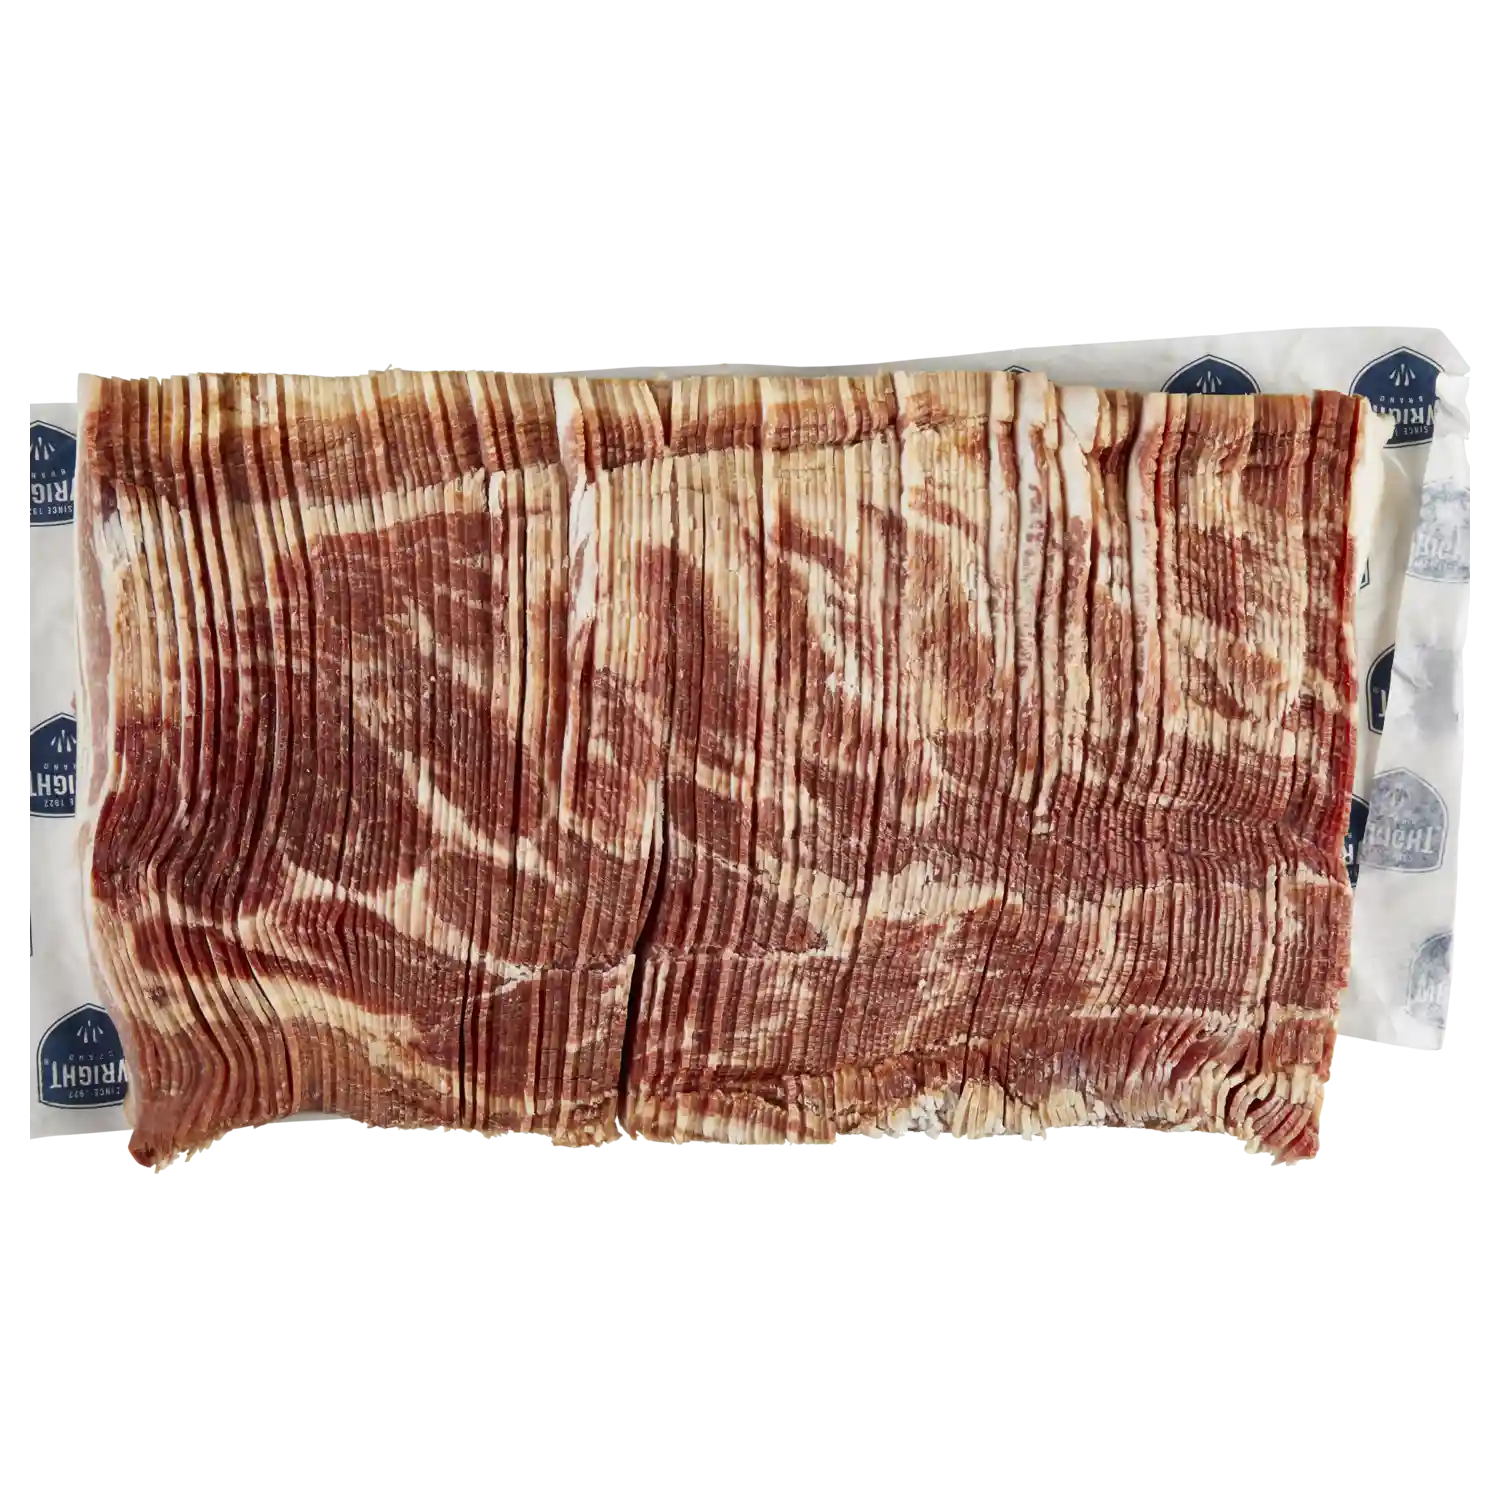 Wright® Brand Naturally Hickory Smoked Thin Sliced Bacon, Bulk, 15 Lbs, 18-22 Slices Per Pound, Frozen_image_31